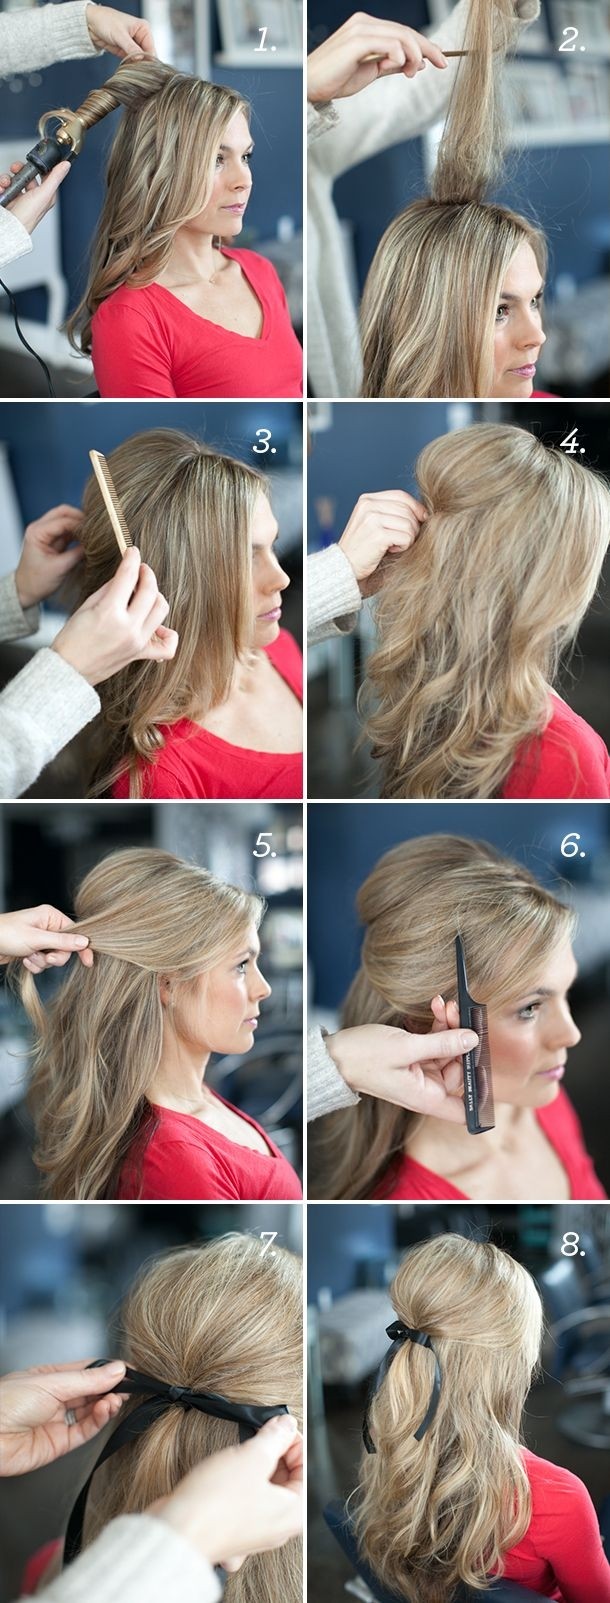 12 Hottest Wedding Hairstyles Tutorials for Brides and Bridesmaids